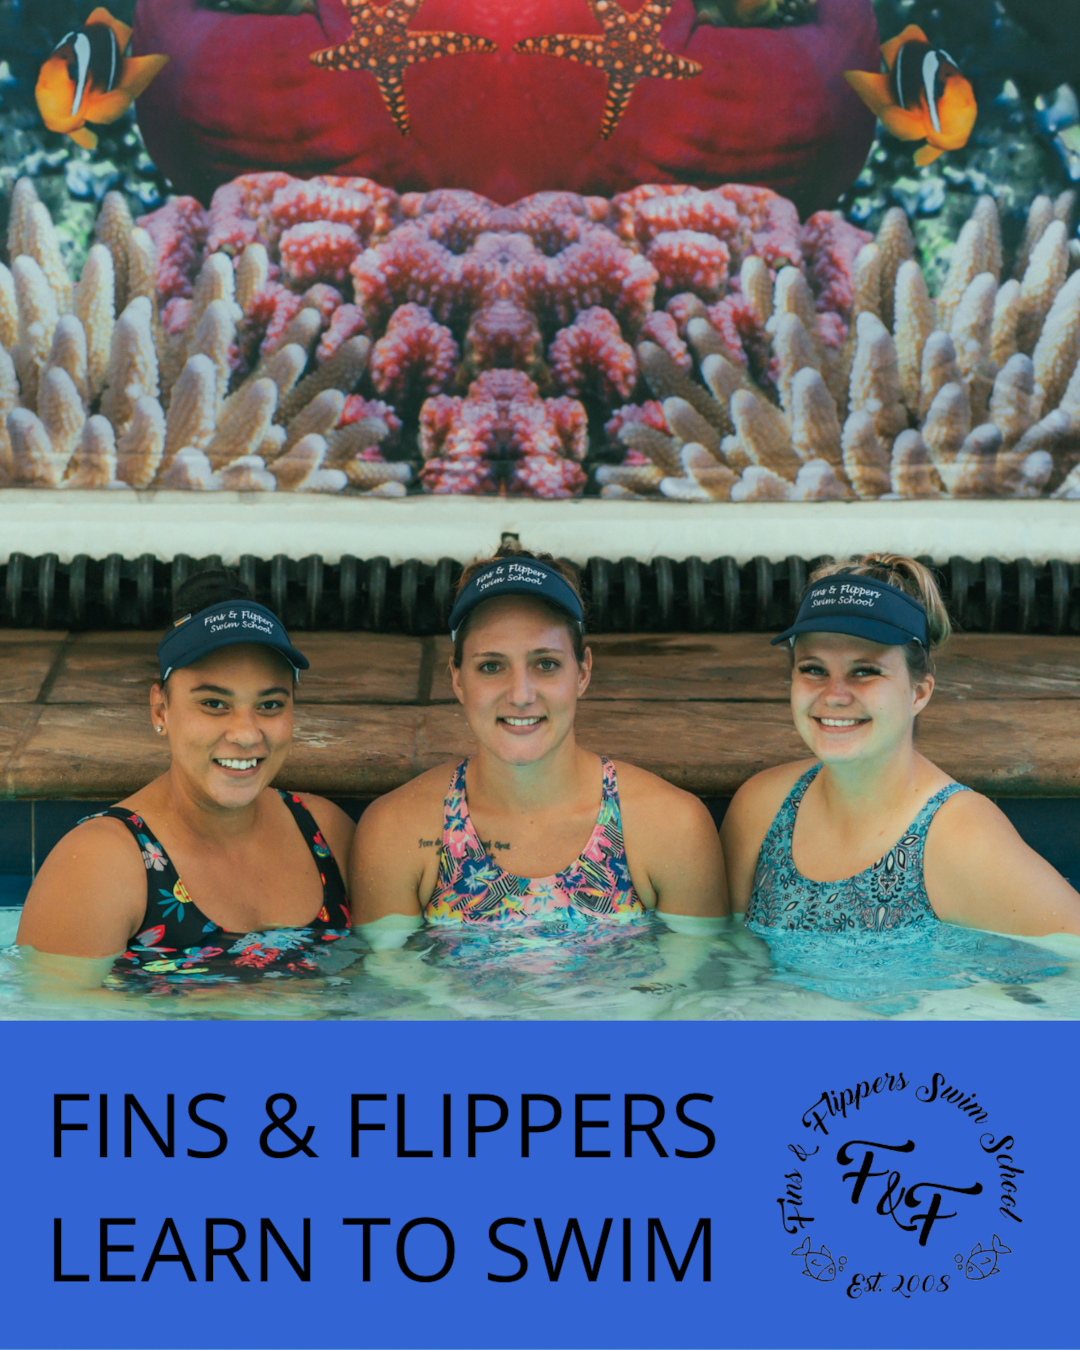 Welcome to Fins & Flippers